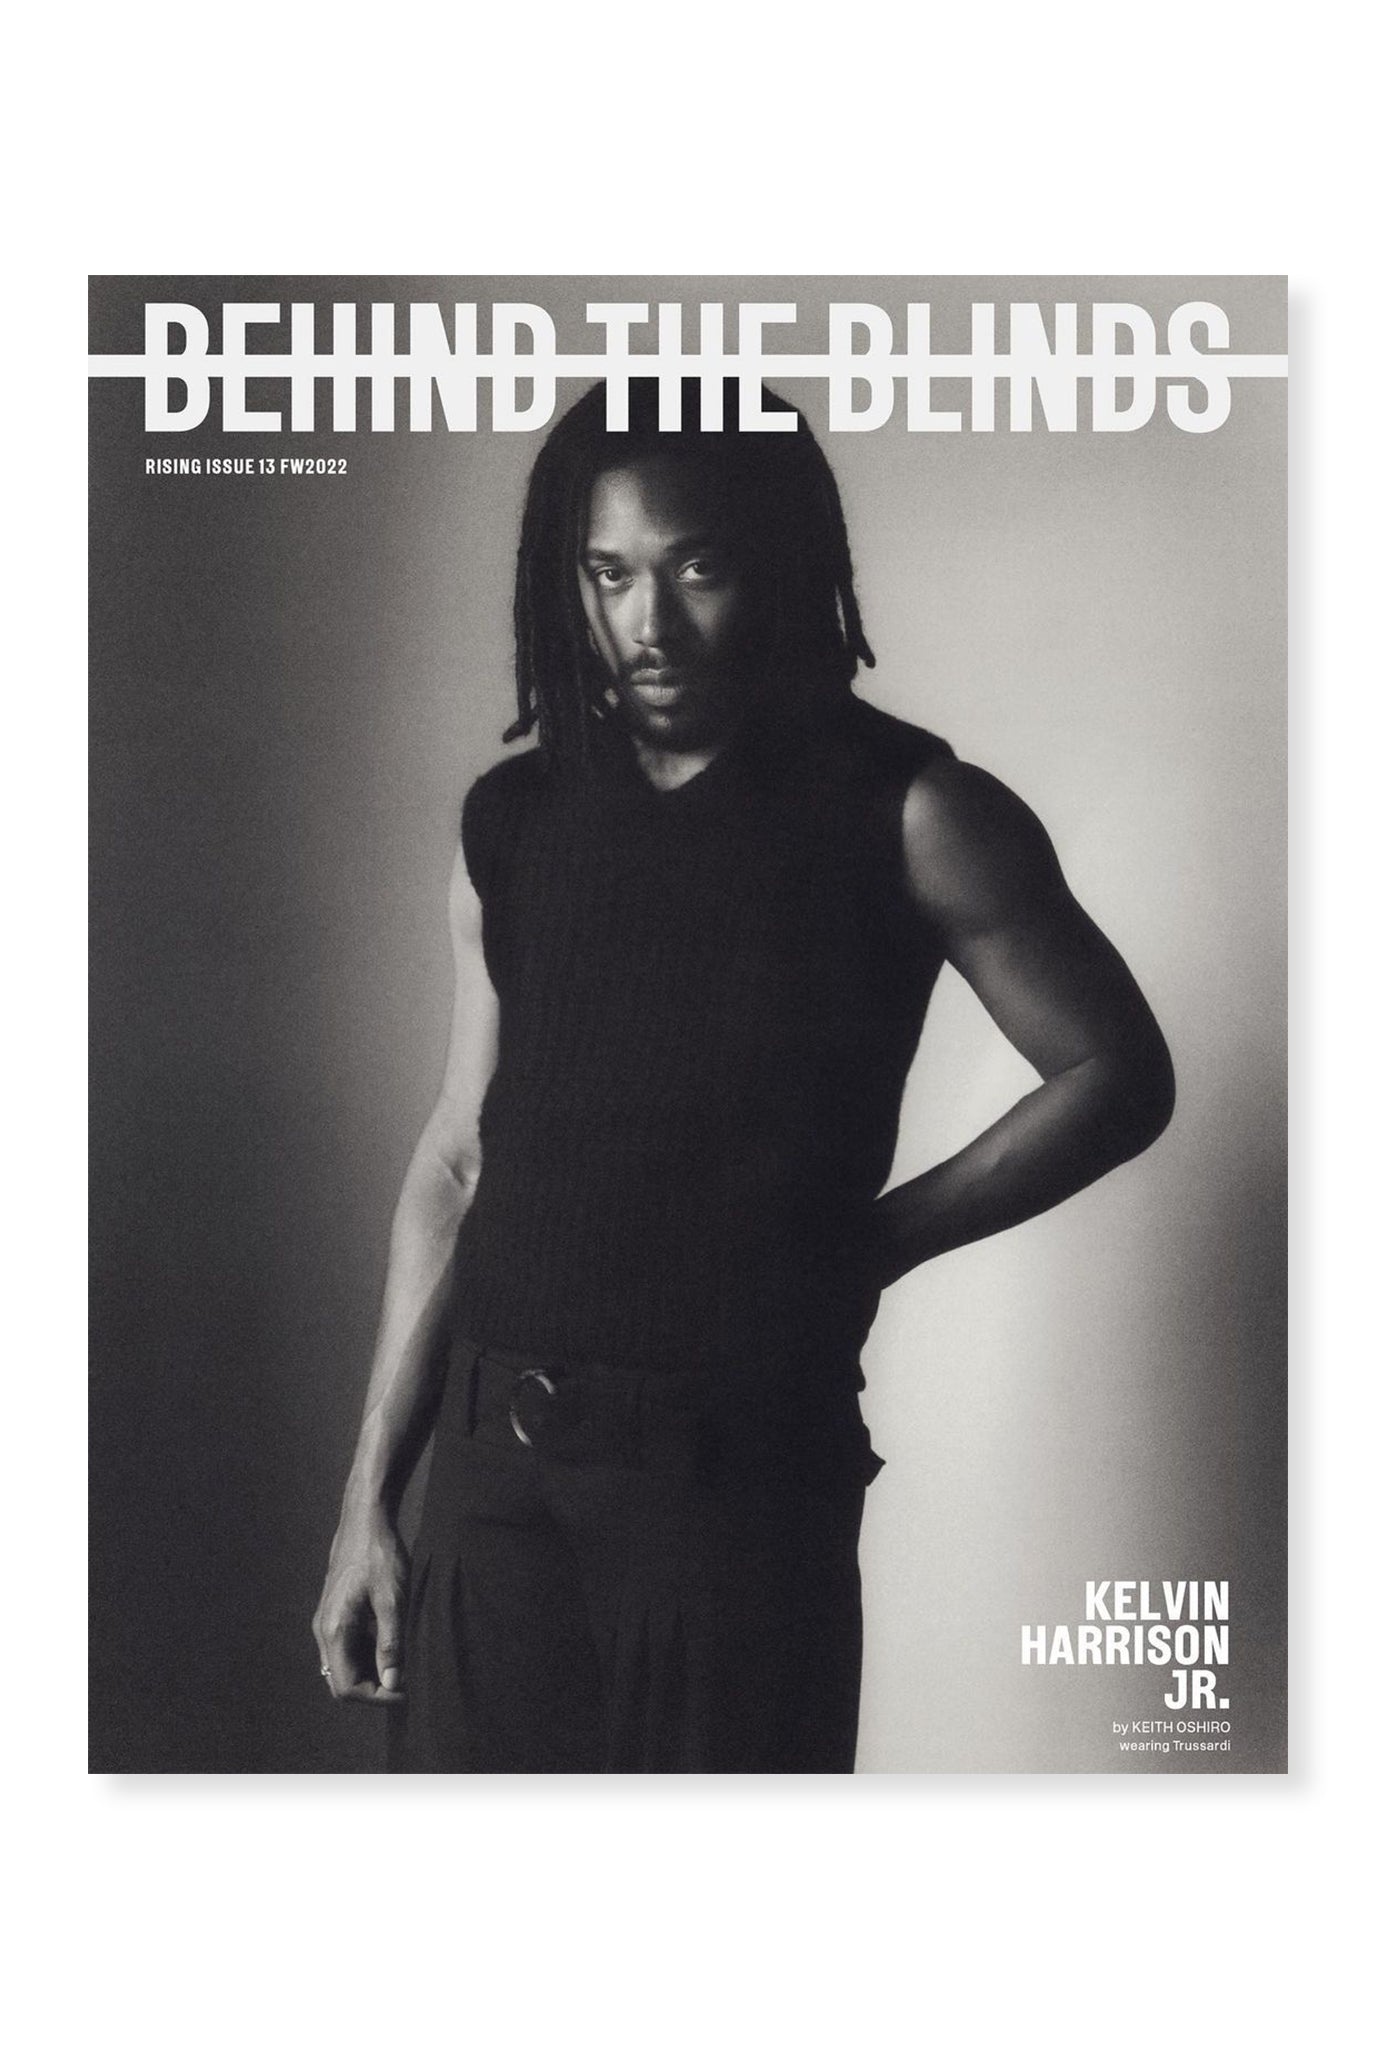 Behind The Blinds, Issue 13